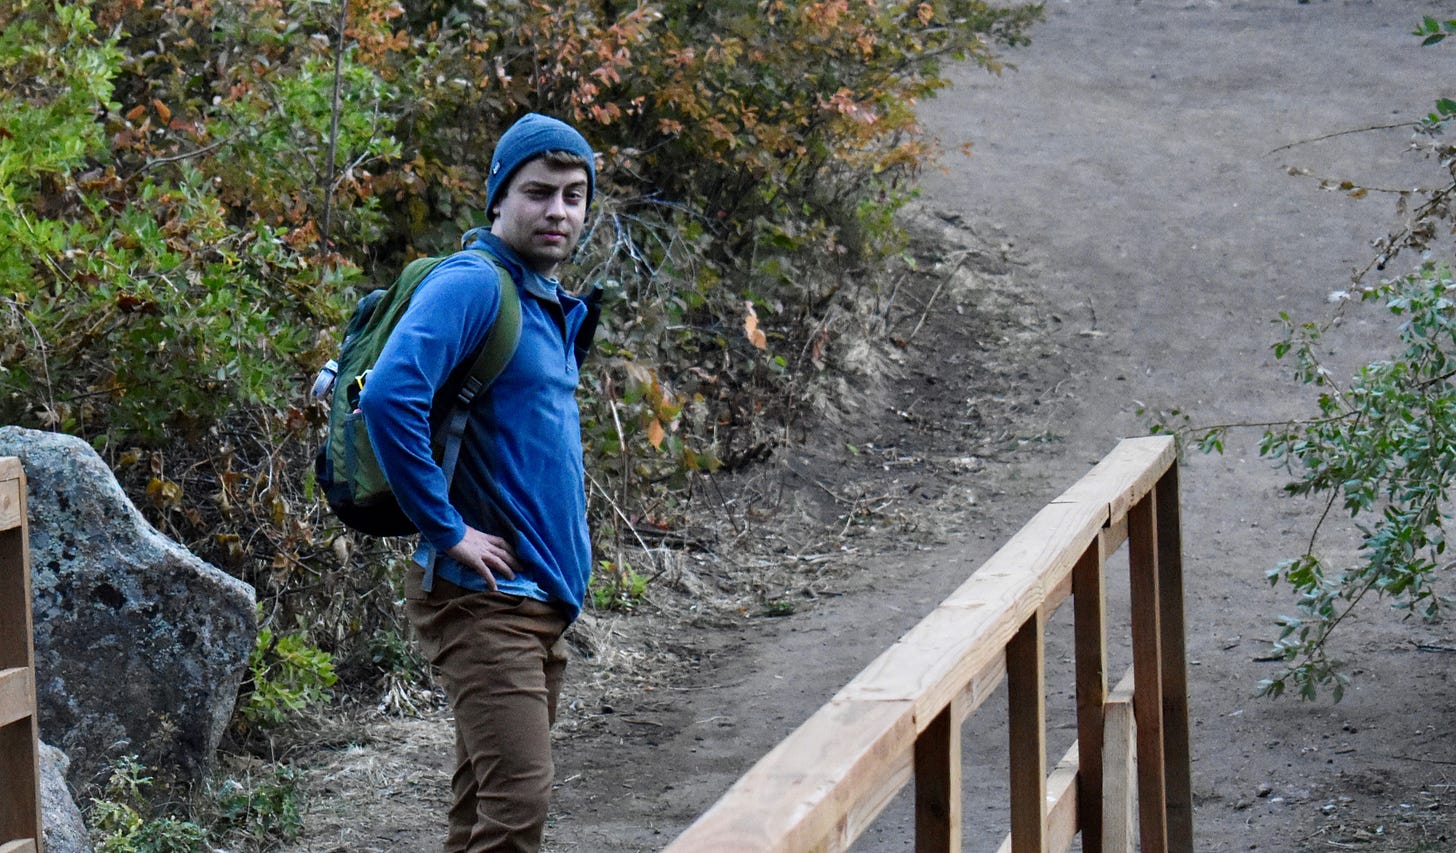 me, modeling my blue quarter zip on a bridge at a river crossing